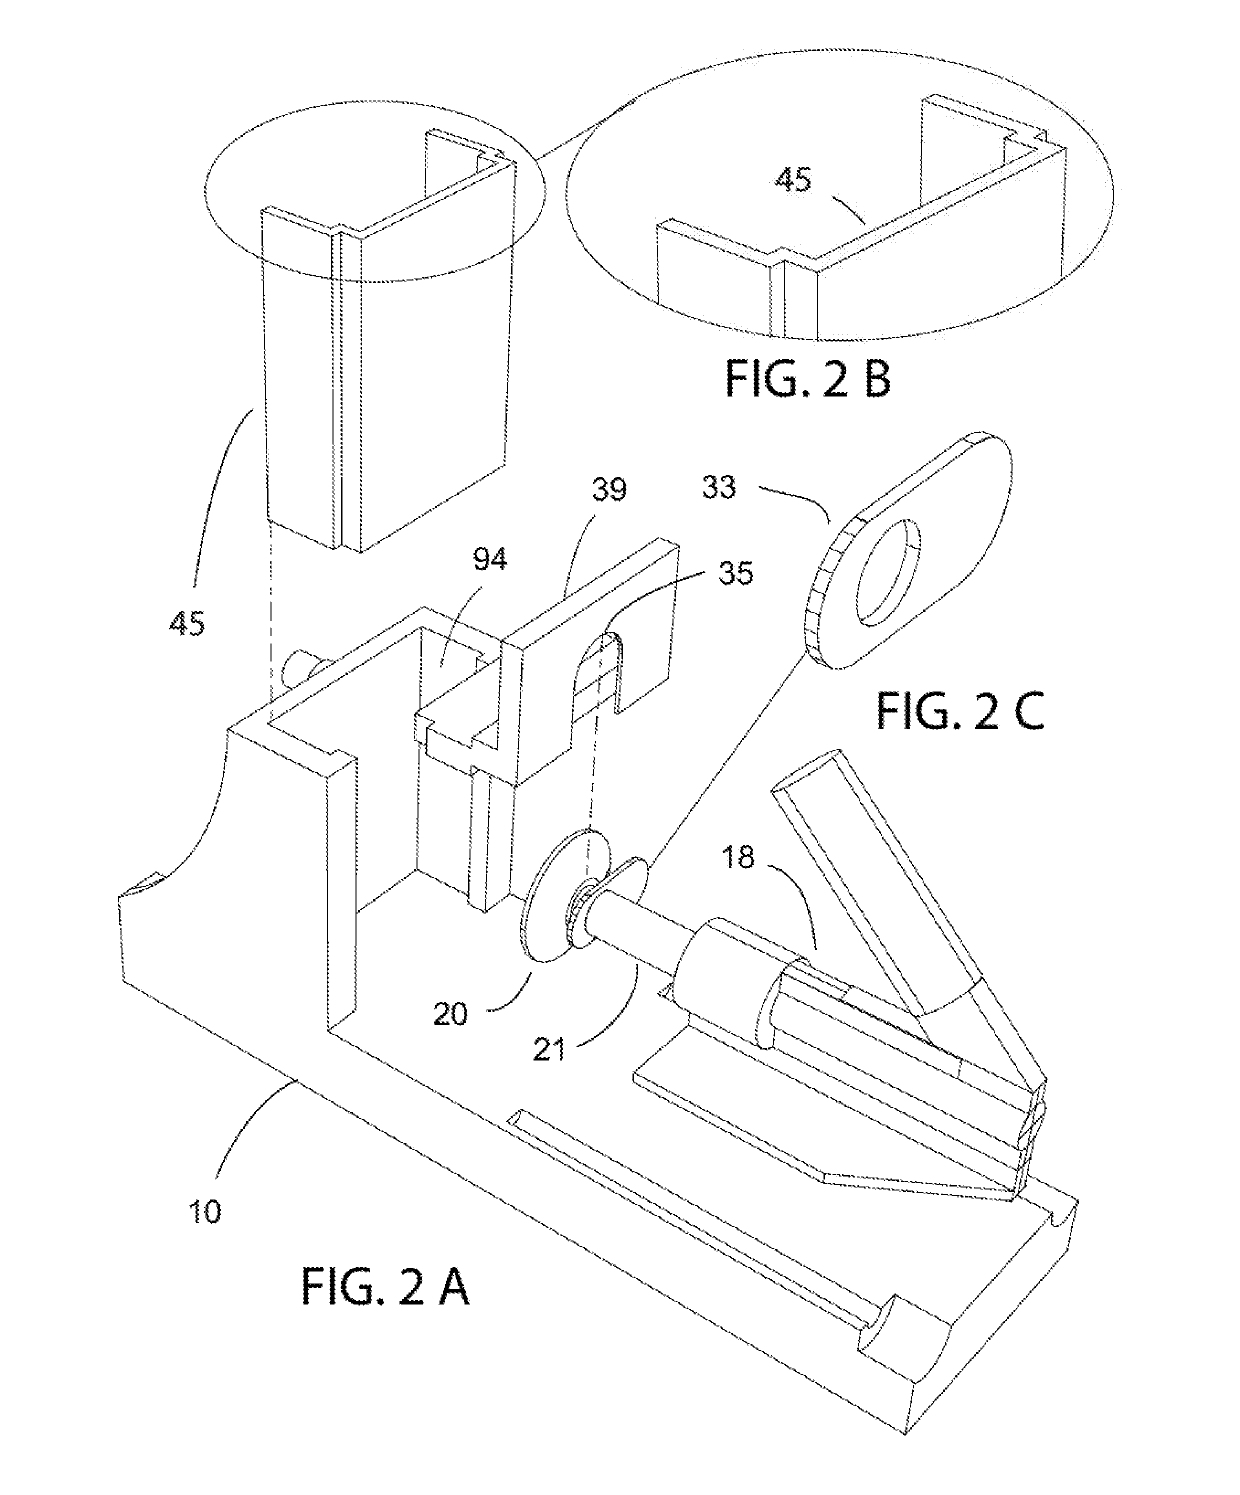 Modular Jig and Fixture Systems and Methods